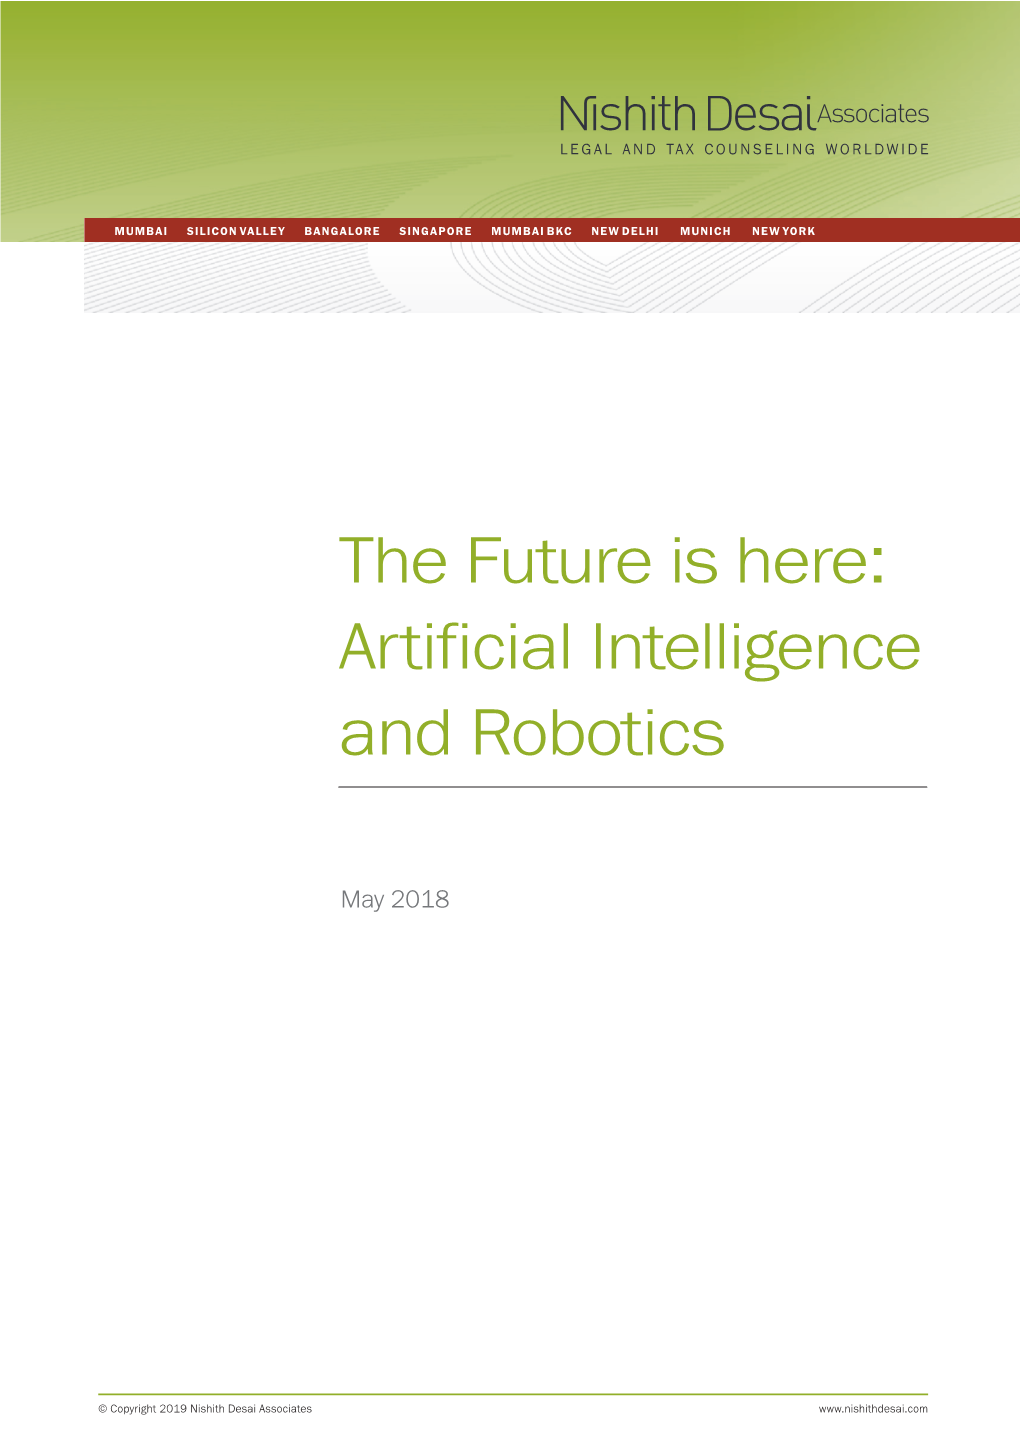 The Future Is Here: Artificial Intelligence and Robotics